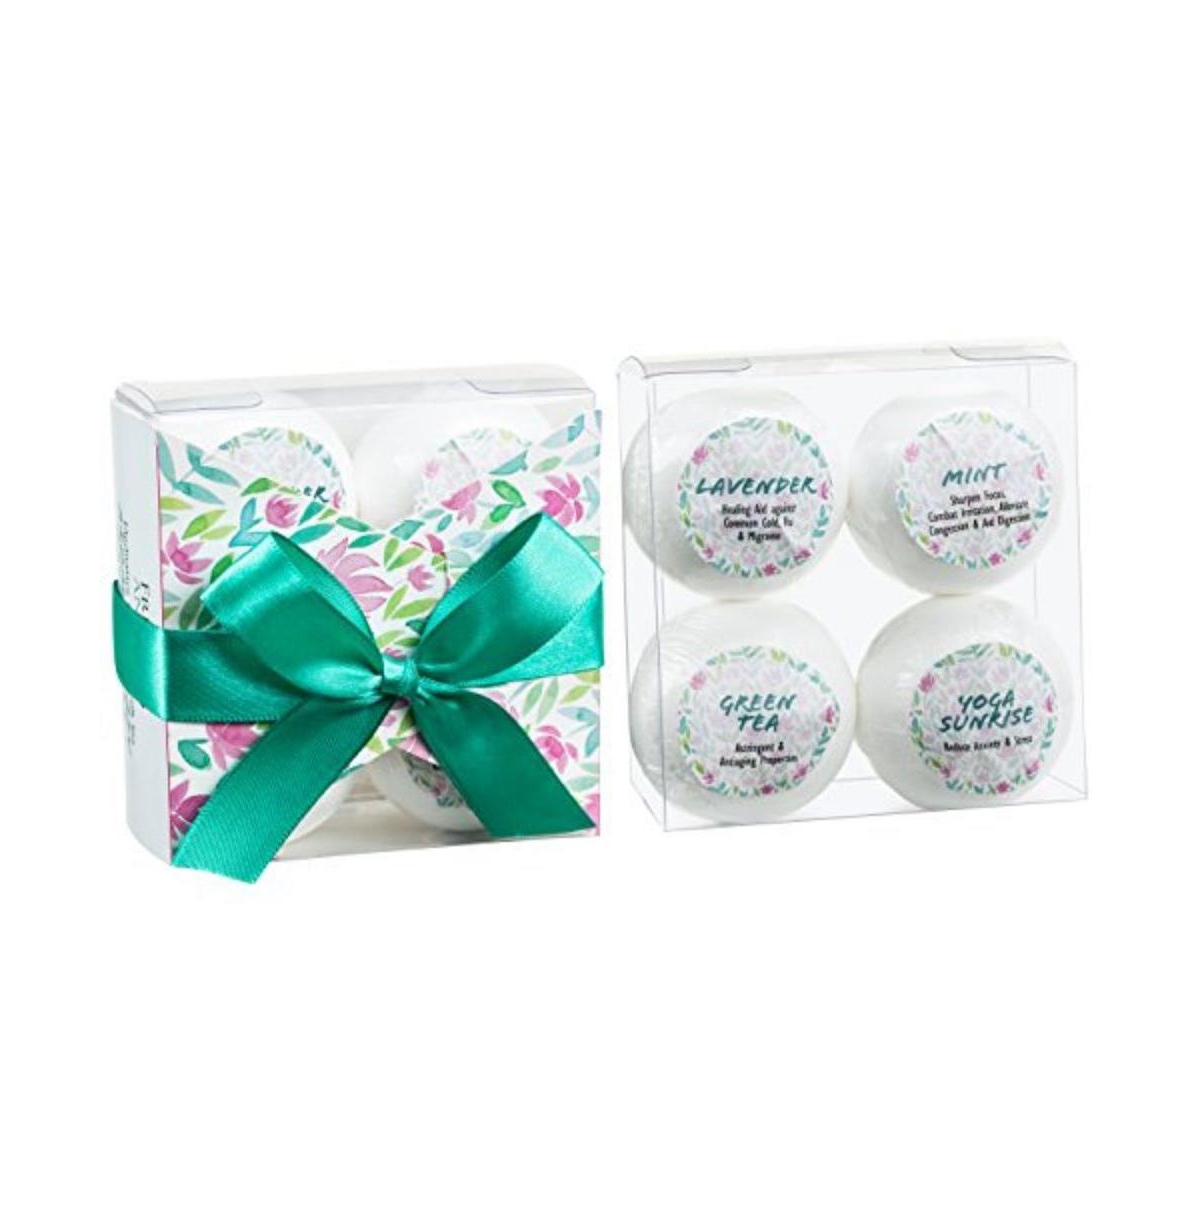 Meditative Serene Soul 4-Piece Fragrance Bath Bomb Set Luxury Body Care Mothers Day Gifts for Mom - Green